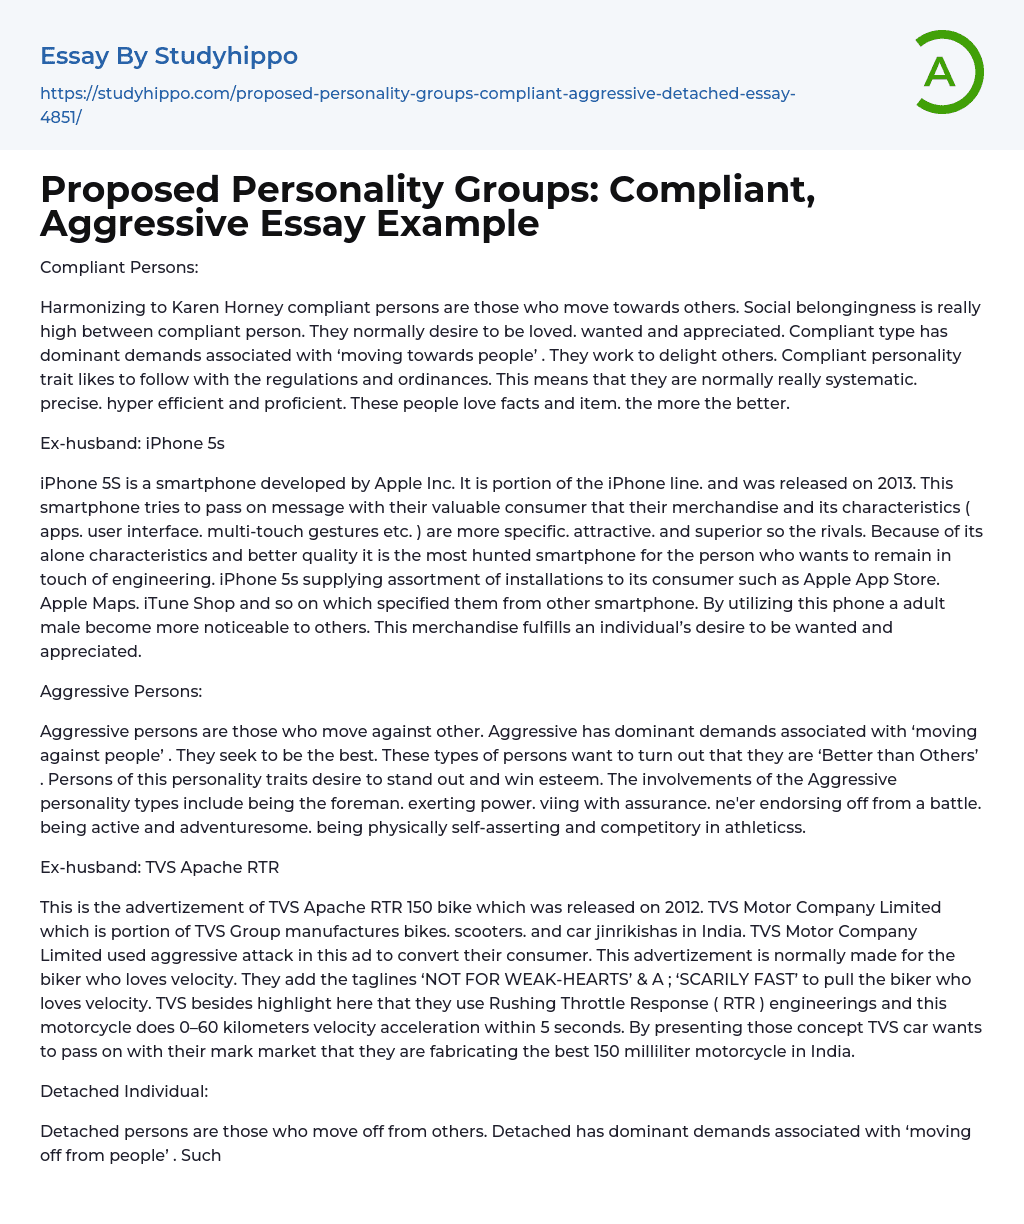 Proposed Personality Groups: Compliant, Aggressive Essay Example